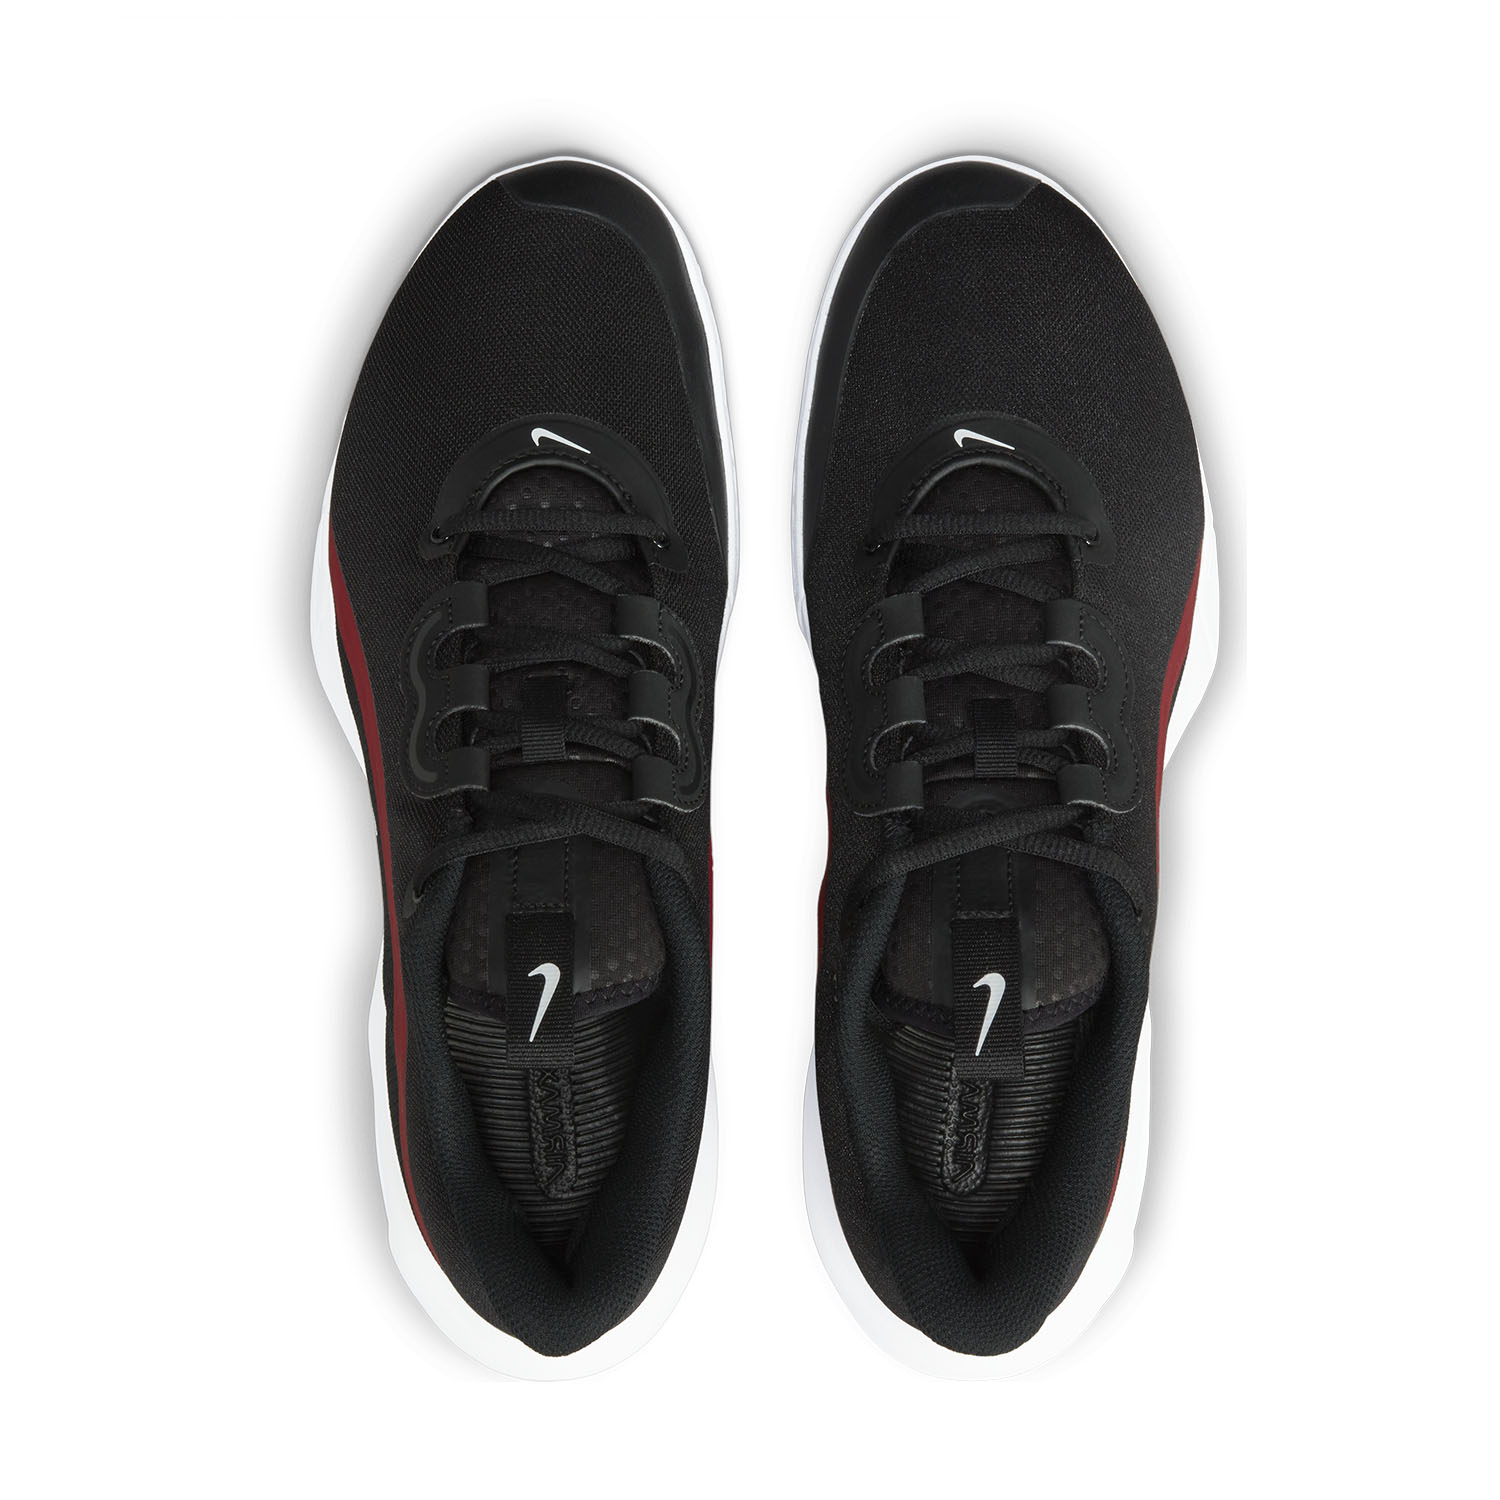 Nike Air Max Volley - Black/White/Gym Red